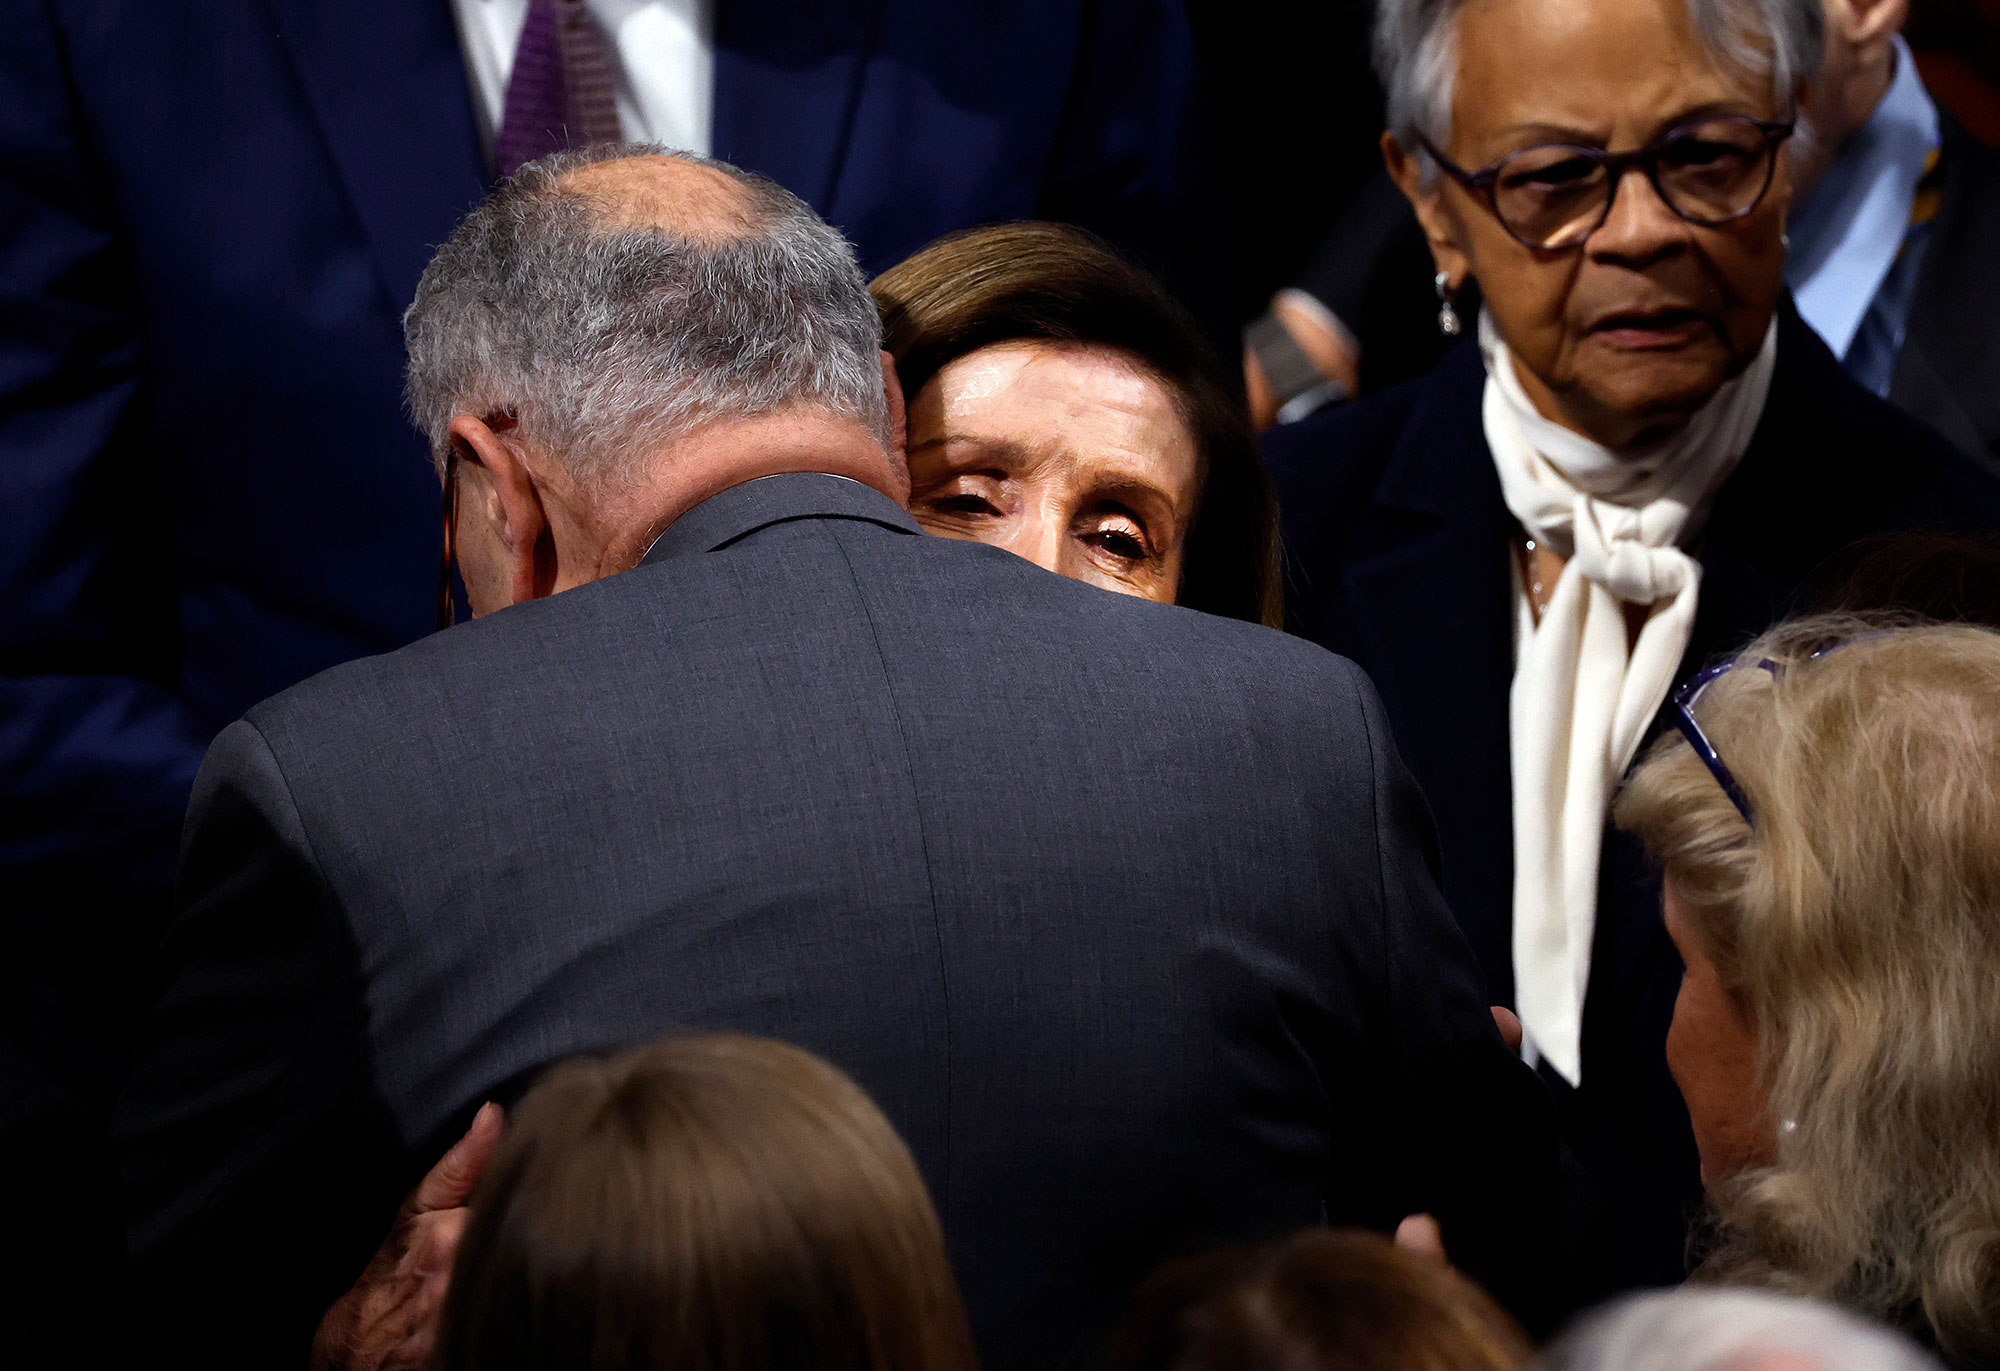 House Speaker Nancy Pelosi hugs Senate Majority Leader Chuck Schumer after she delivered remarks from the House Chambers on November 17. 